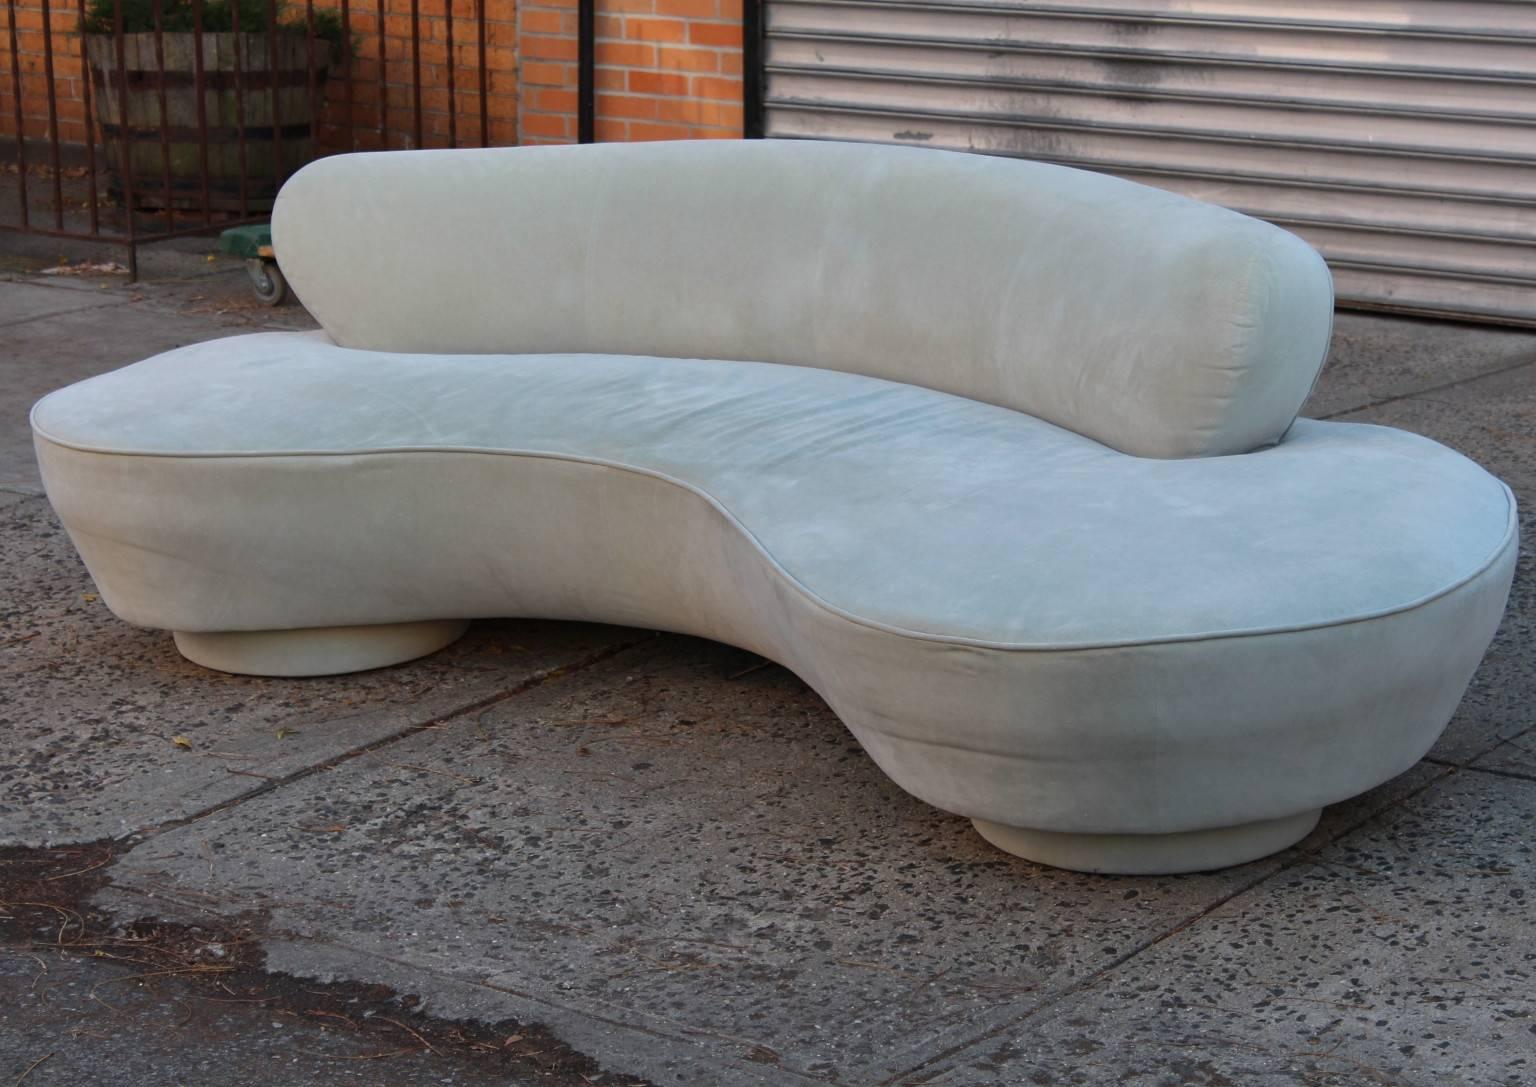 This postmodern serpentine sofa, designed by Vladimir Kagan for Directional, circa 1990s, takes form as a curved seat with central backrest, entirely upholstered in light grey ultrasuede, with two rounded bases to each end and a middle Lucite